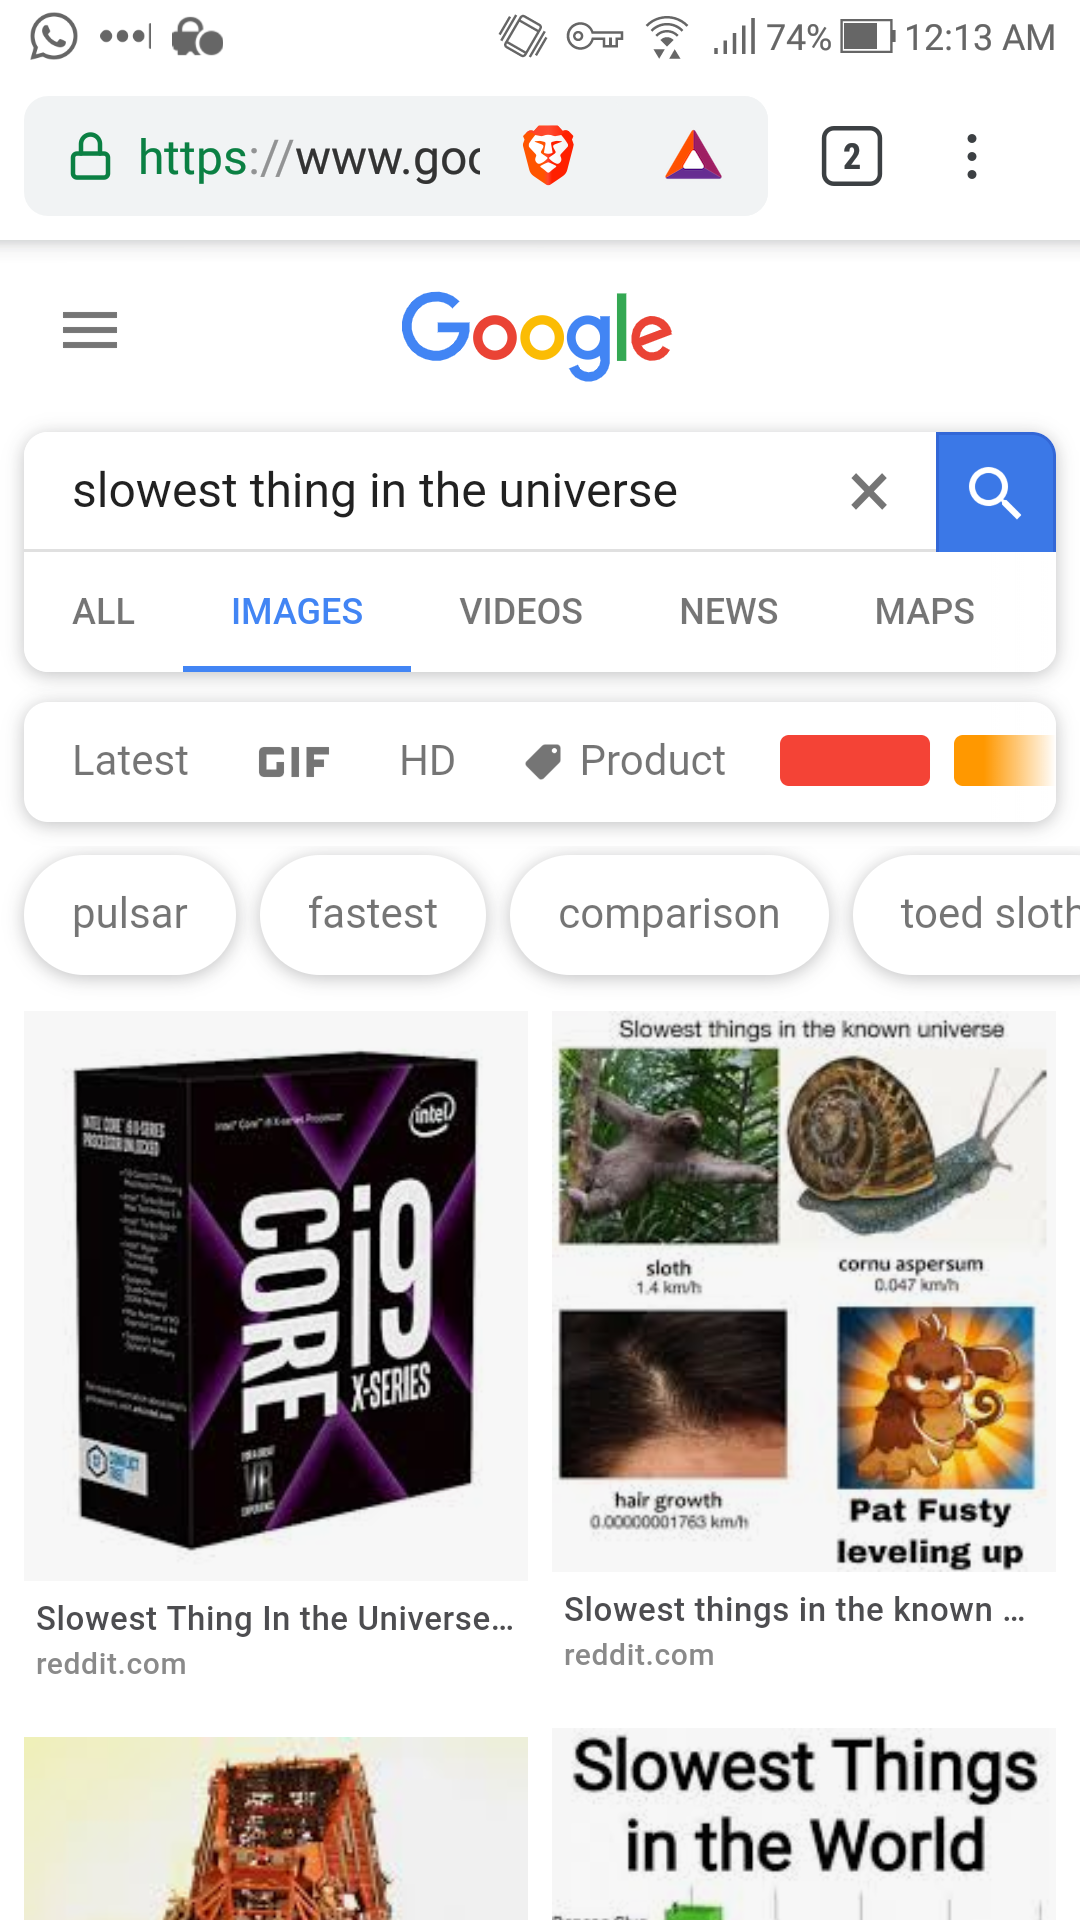 What are the slowest thing in the universe?